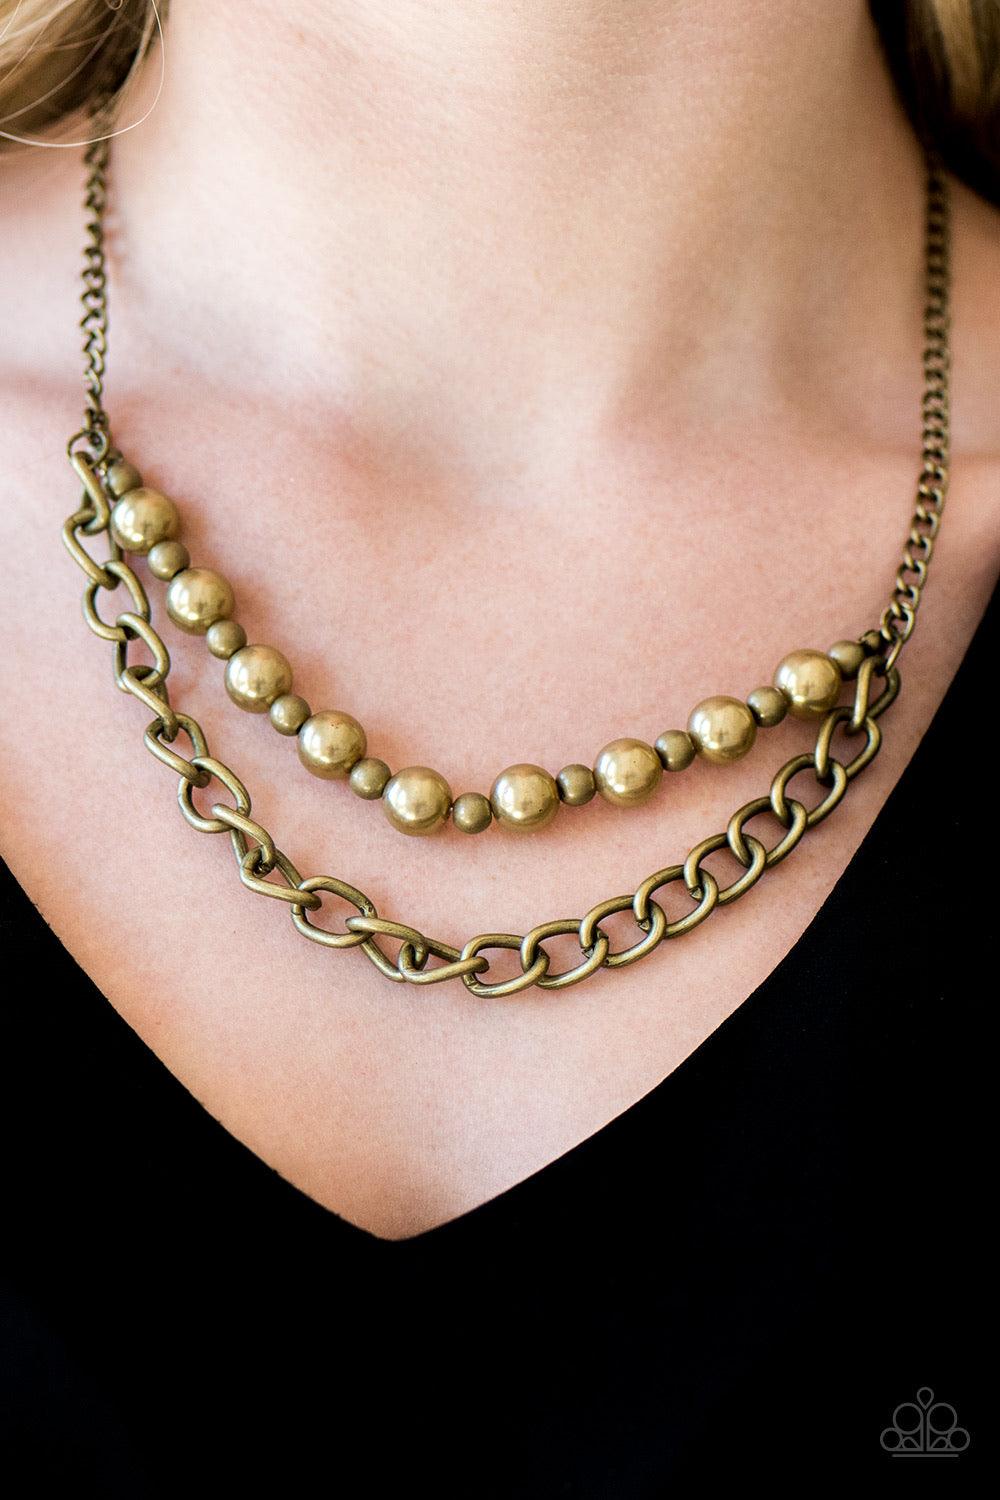 Paparazzi Accessories Glam and Grind - Brass Pearly brass and rustic brass beads are threaded along a skinny wire. The pearly beading gives way to a bold strand of brass chain, creating edgy layers below the collar. Features an adjustable clasp closure. S